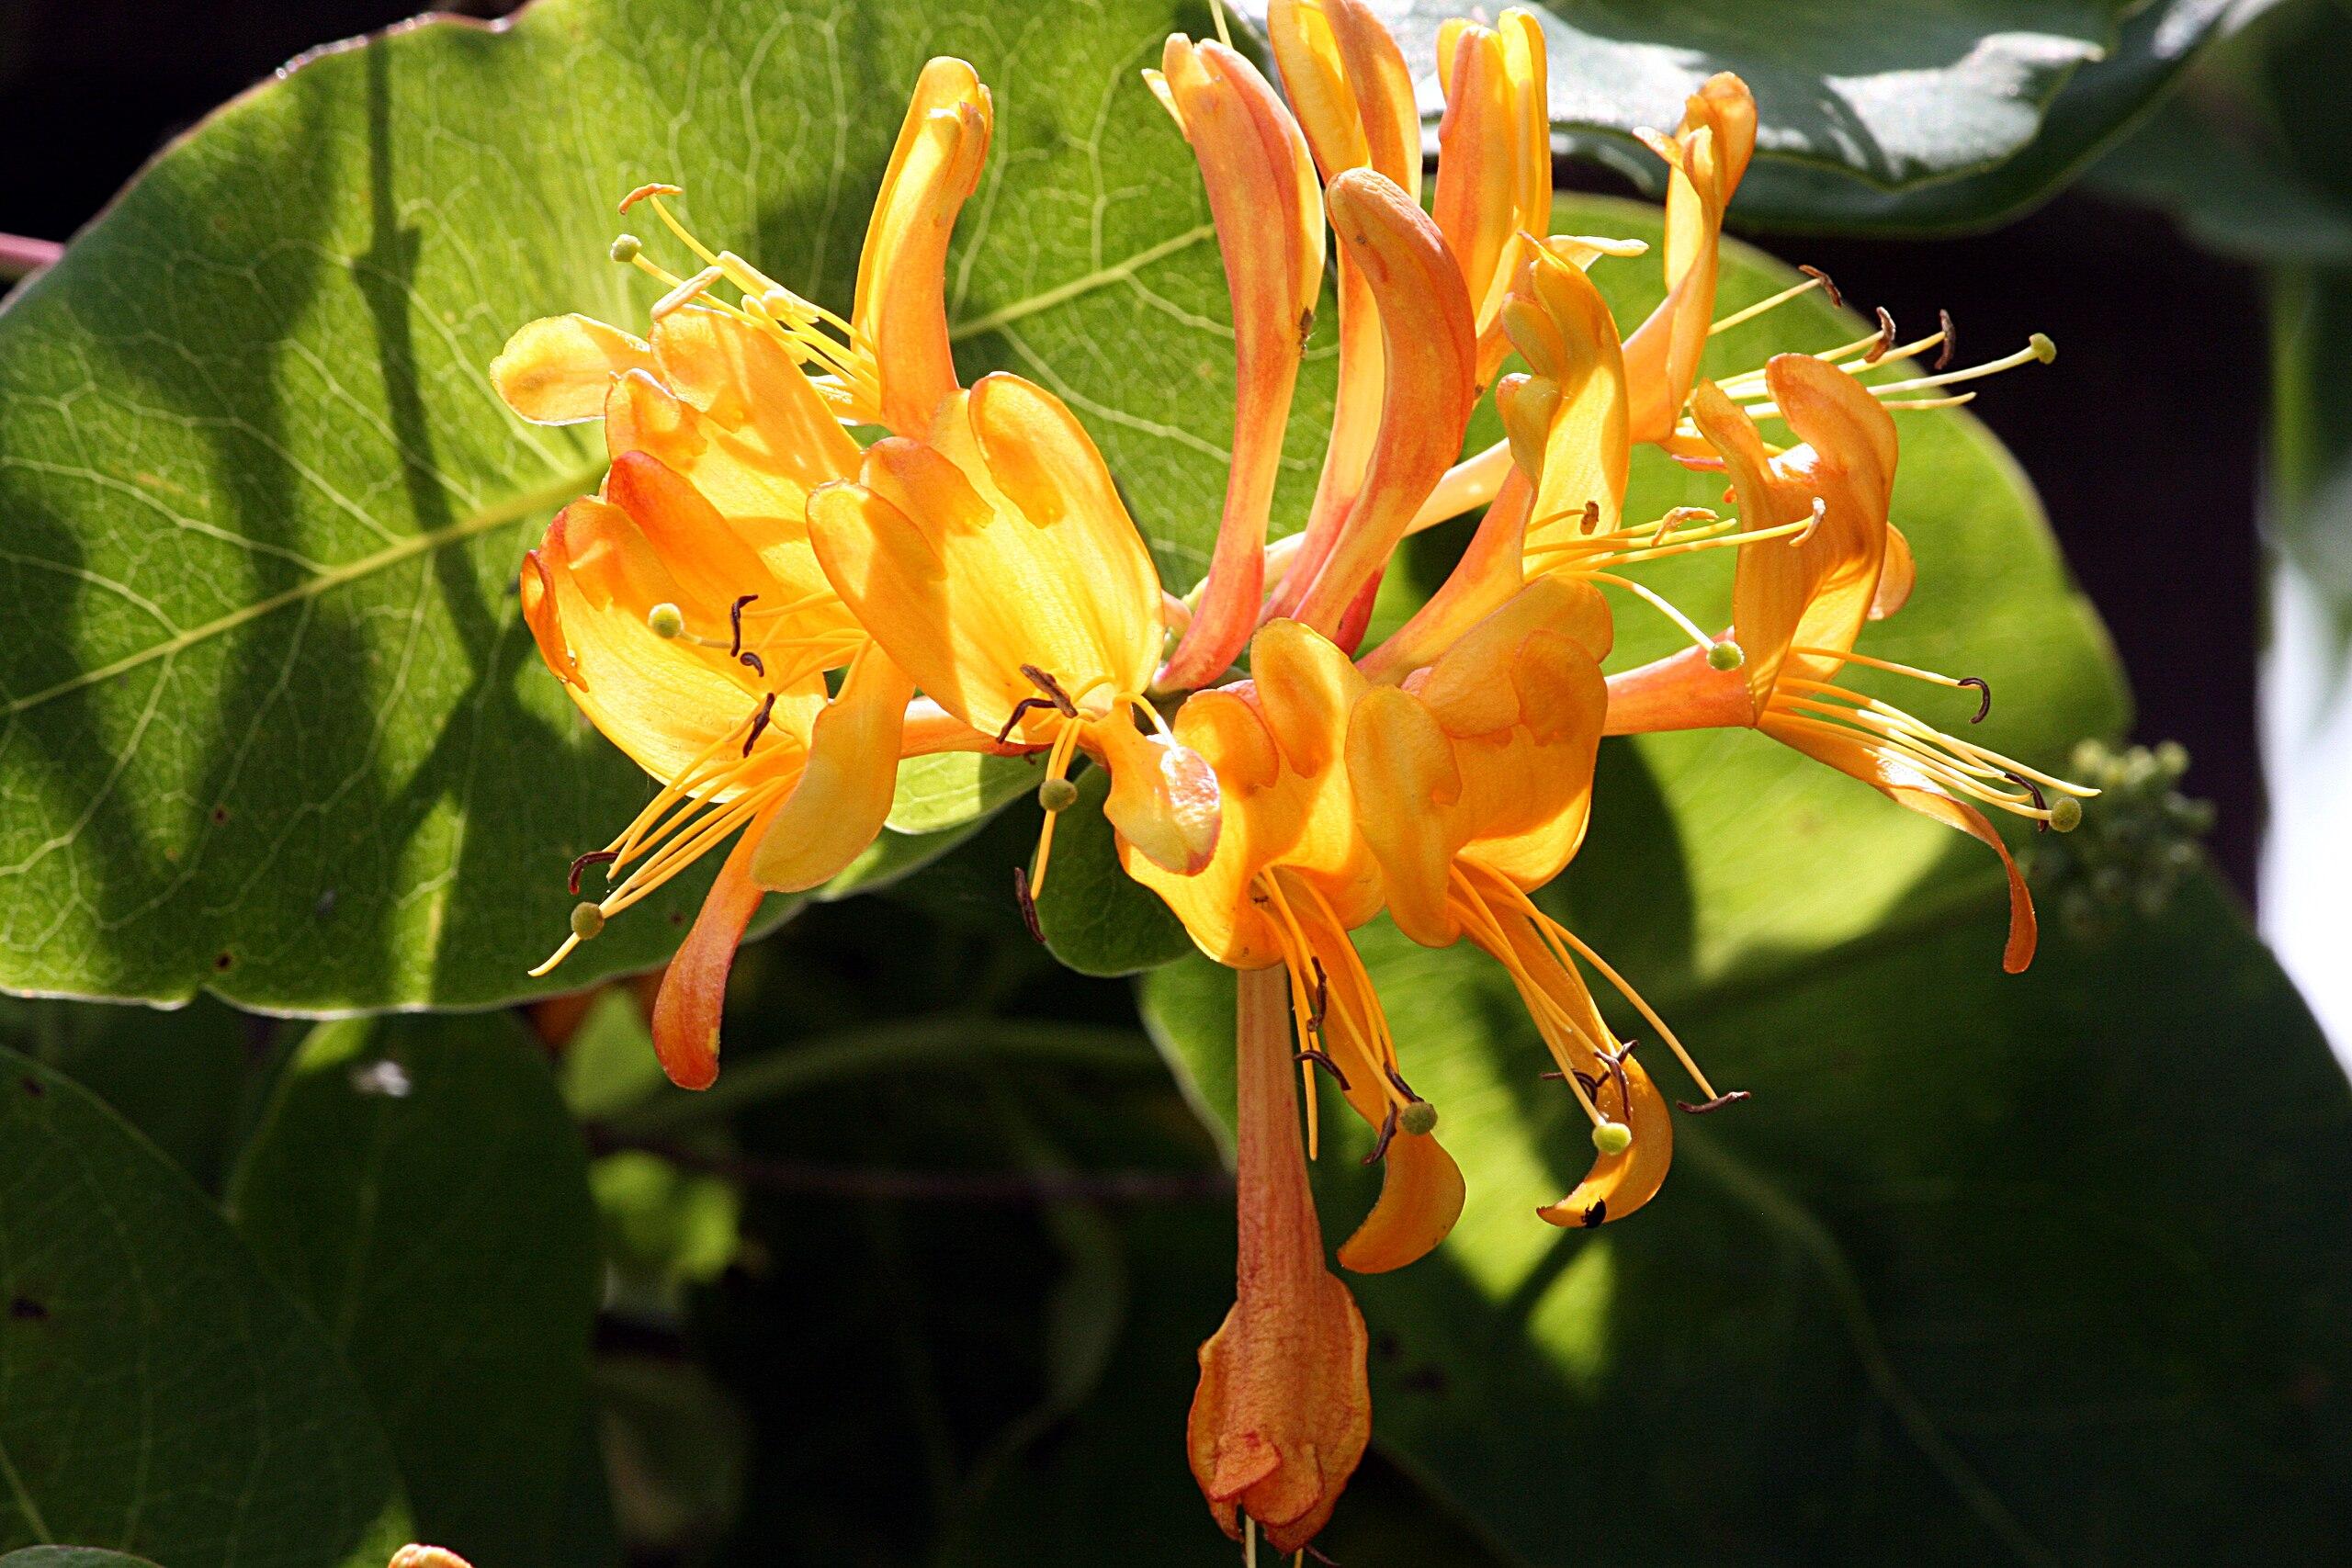 Orange flowers, with lime stigma, orange style and filaments, Brown-orange anthers, green leaves, yellow midrib blades and veins